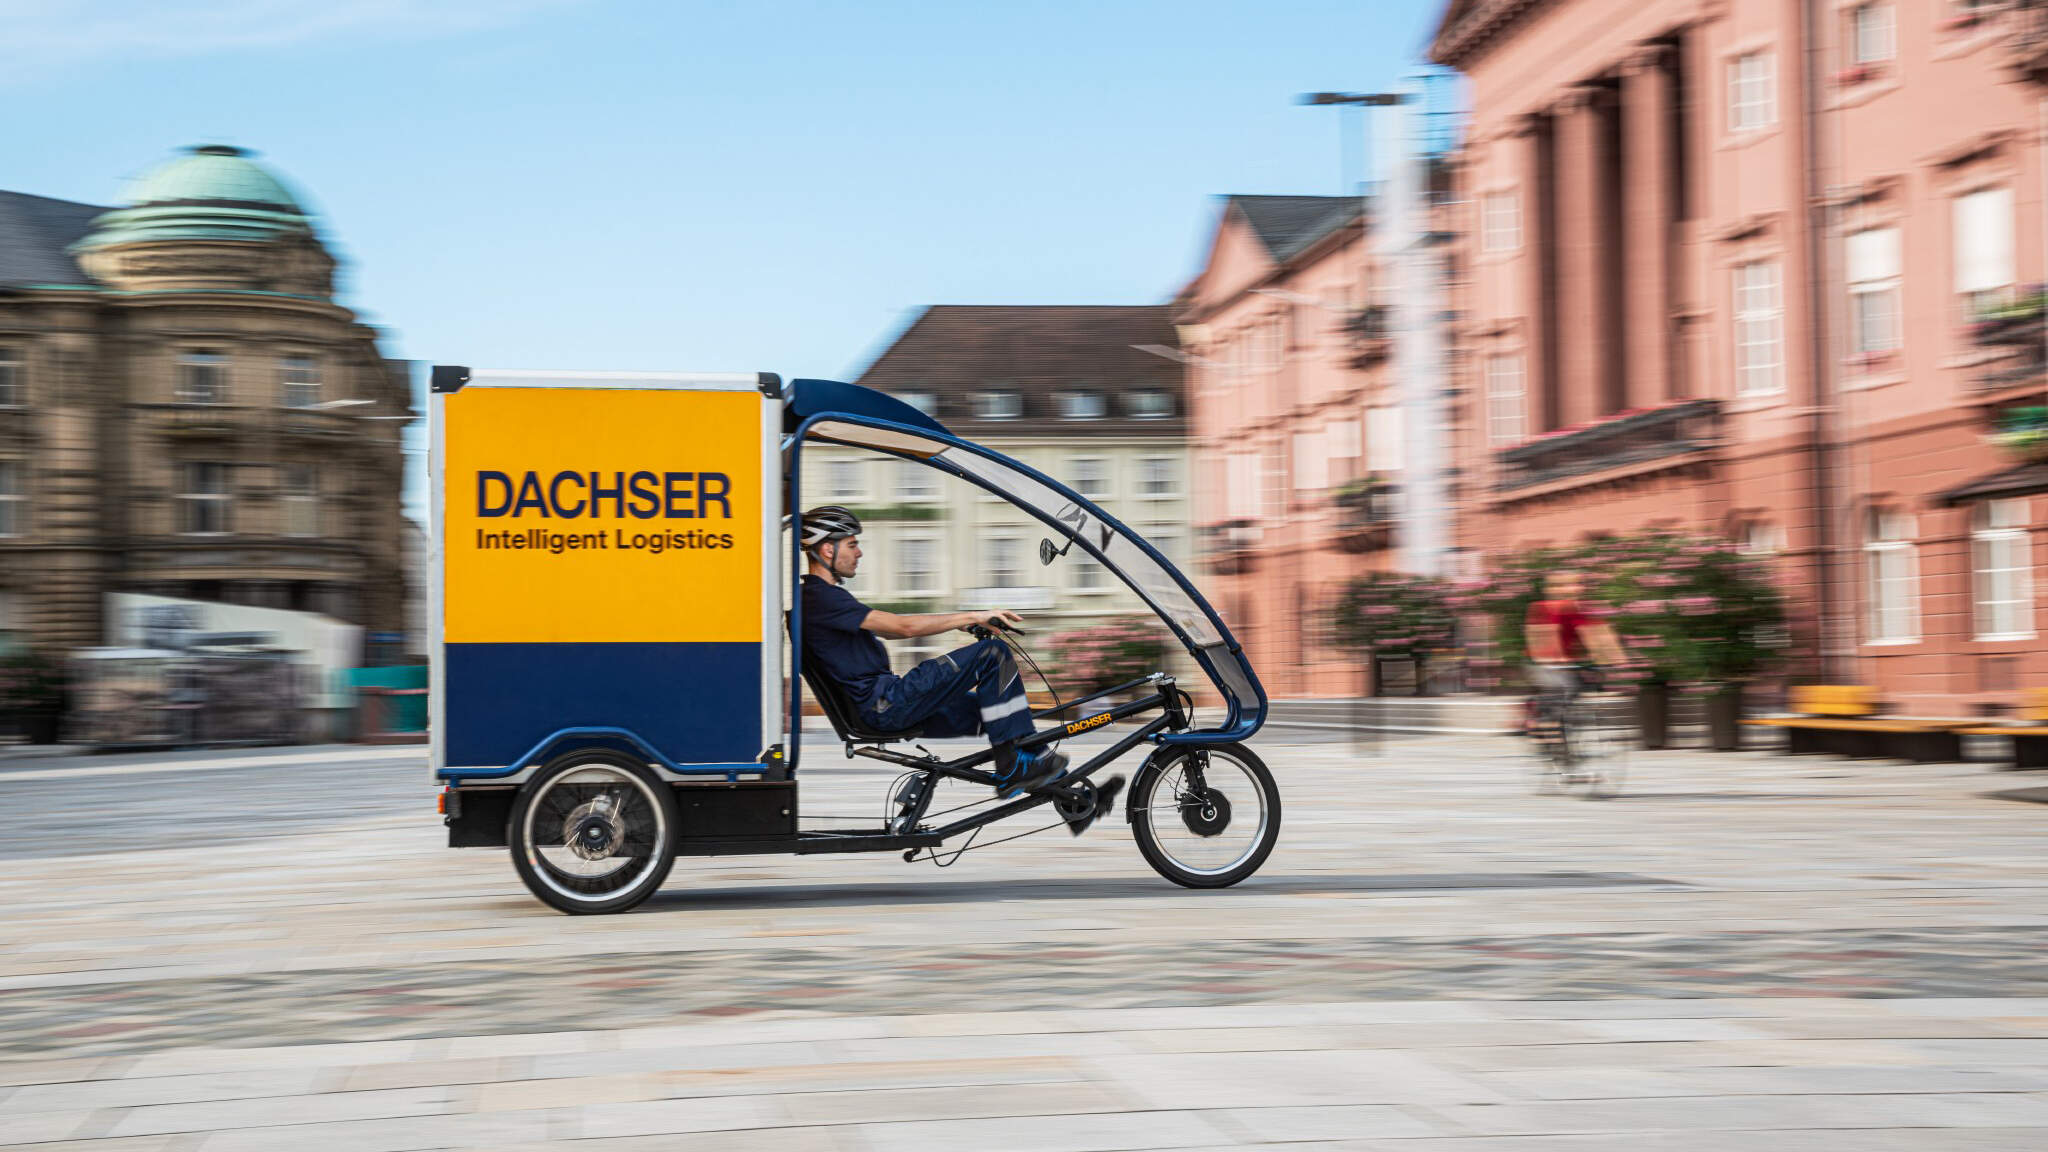 Because the battery-electric trucks and cargo bikes emit no air pollutants, they play a major part in keeping the air clean.